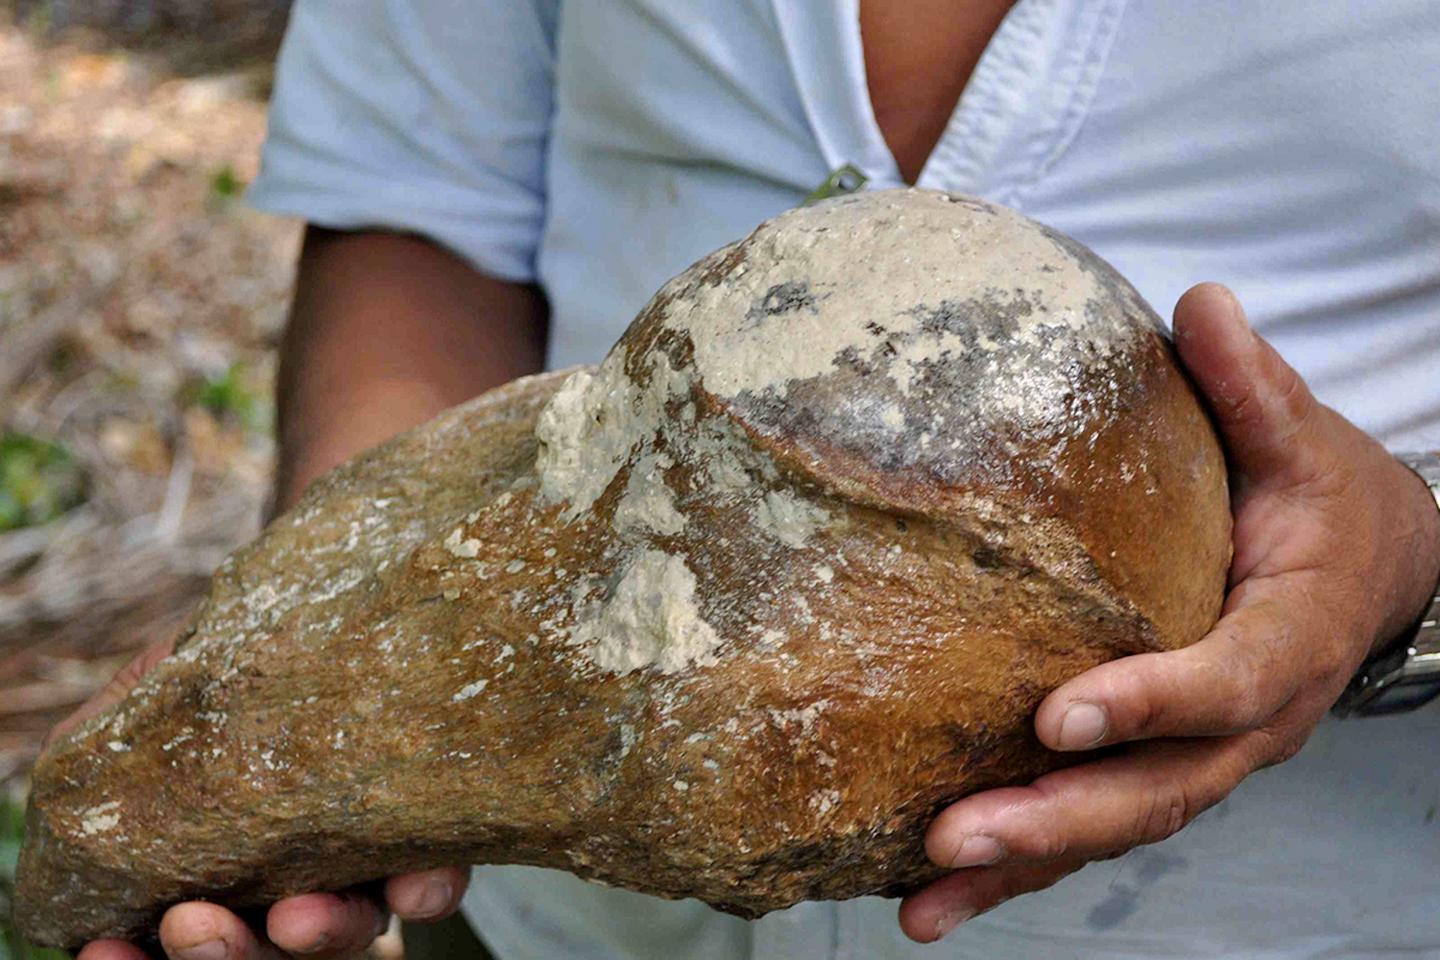 The Tooth of The First Fossilized Giant Ground Sloth from Belize Exposes its World